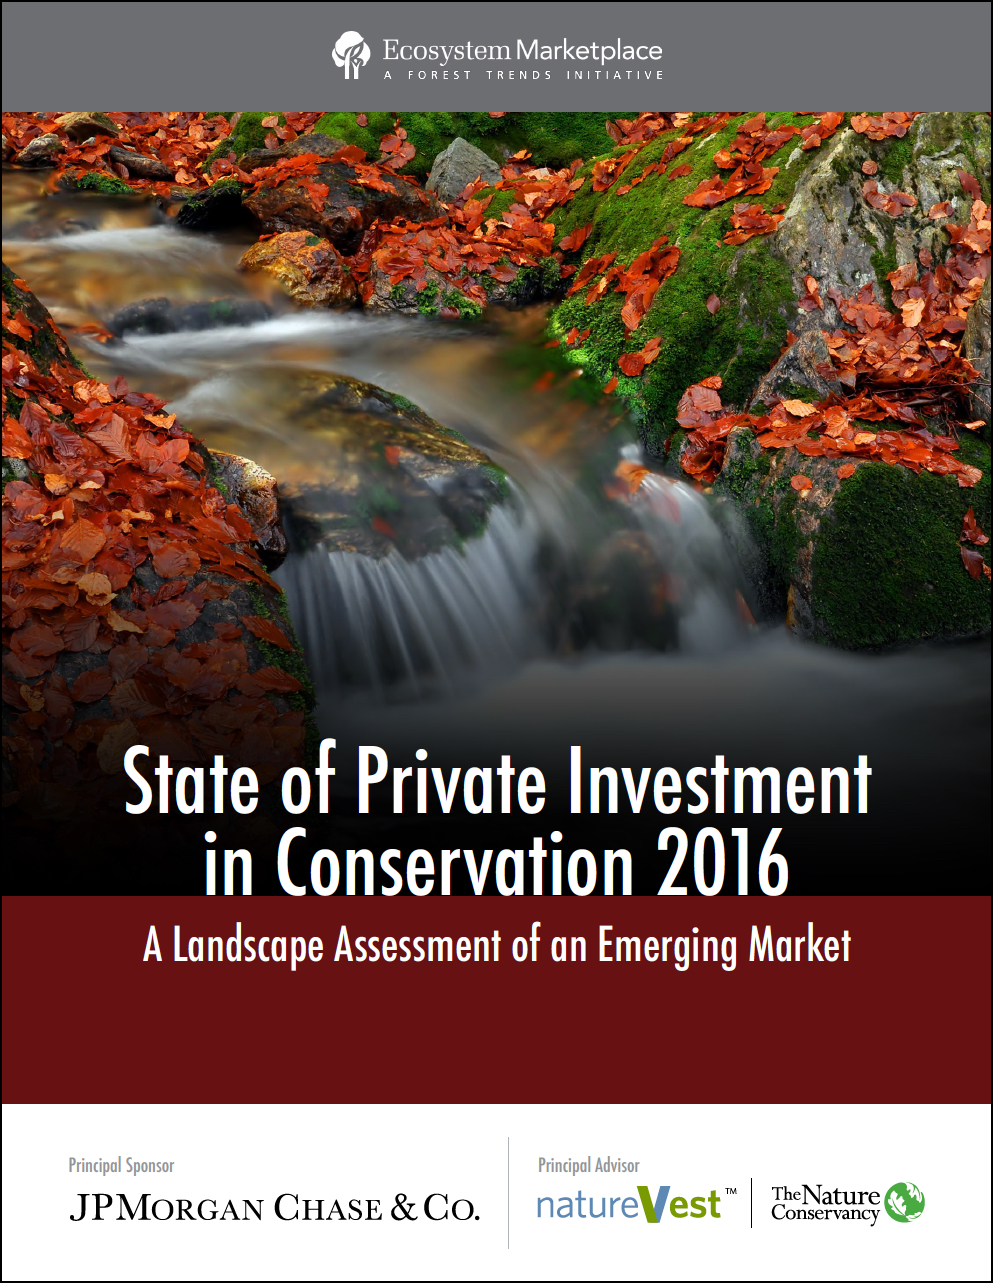 State of Private Investment in Conservation 2016: A Landscape Assessment of an Emerging Market